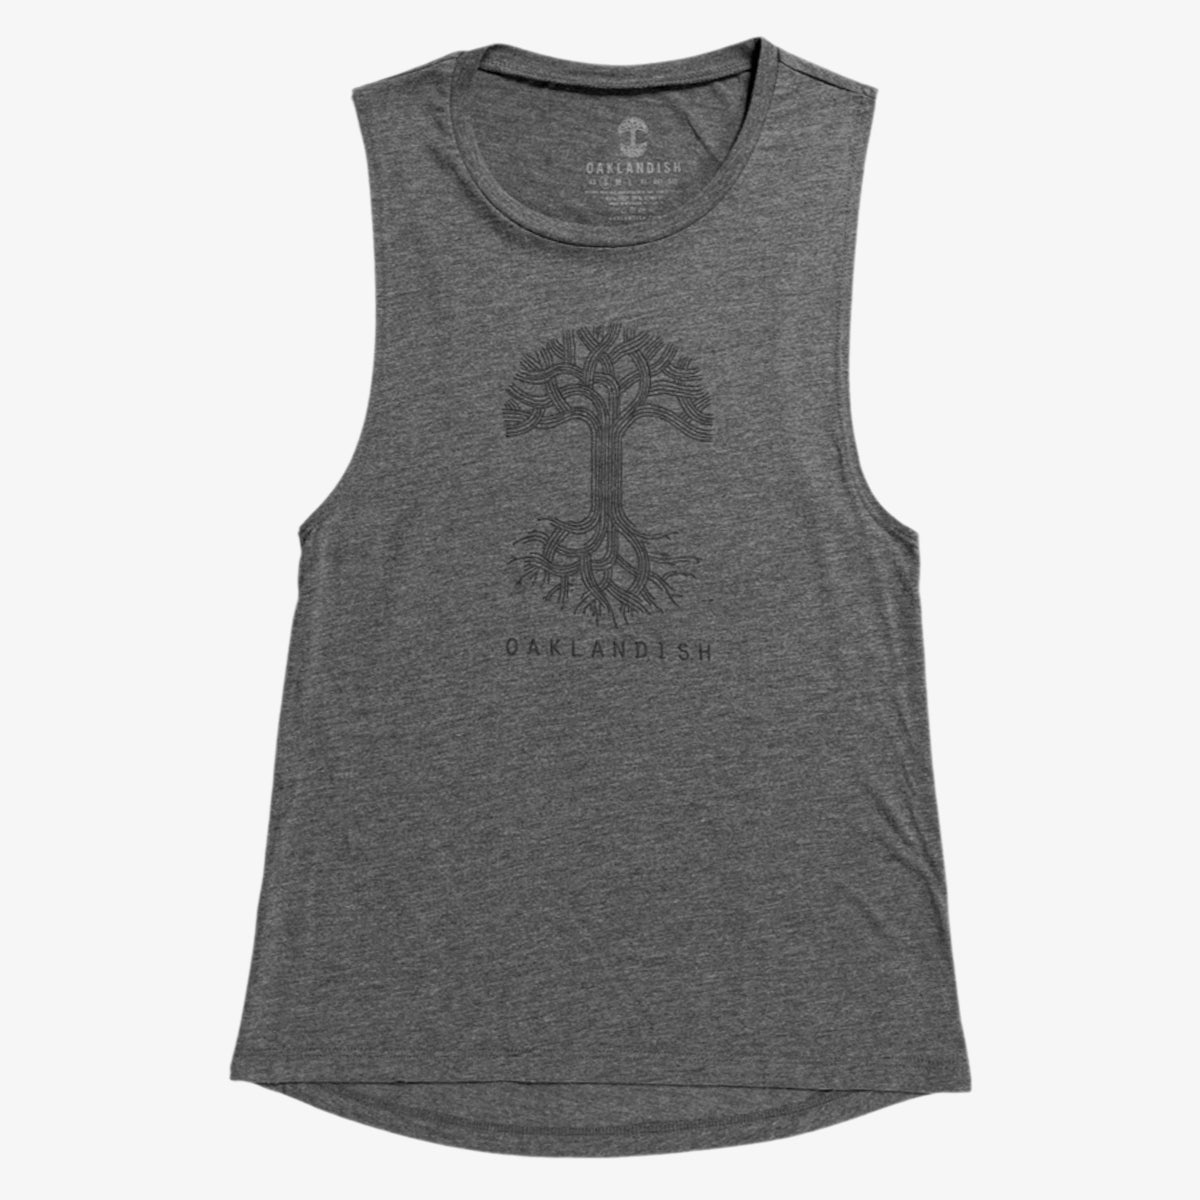 Grey women’s cut tank top with black classic Oaklandish tree logo and wordmark on chest.